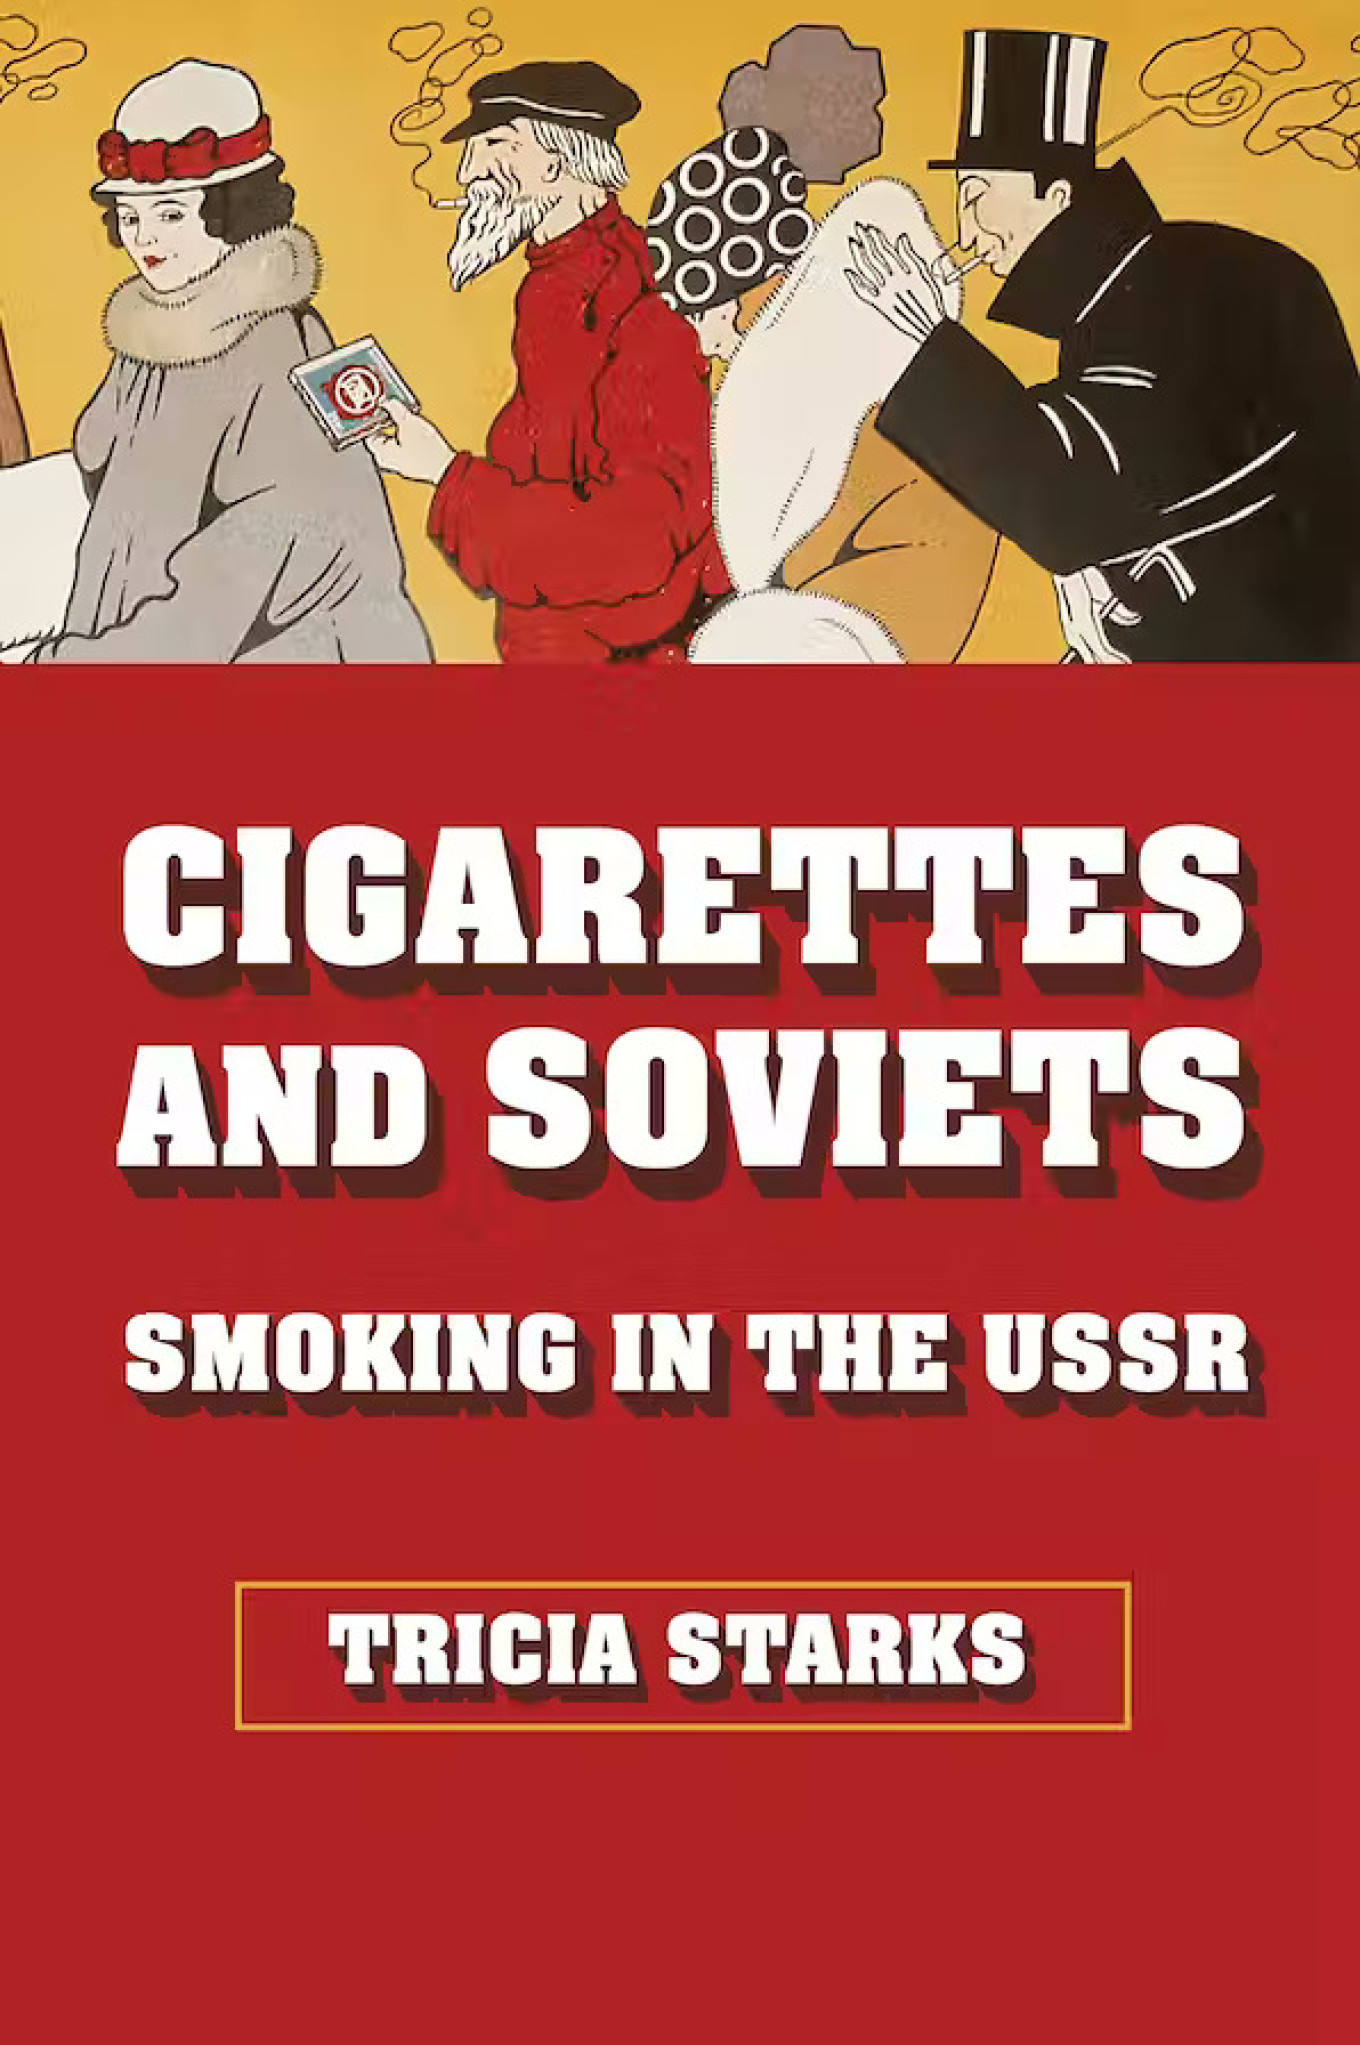 Tricia Starks Takes On ‘Cigarettes and Soviets: Smoking in the U.S.S.R.’